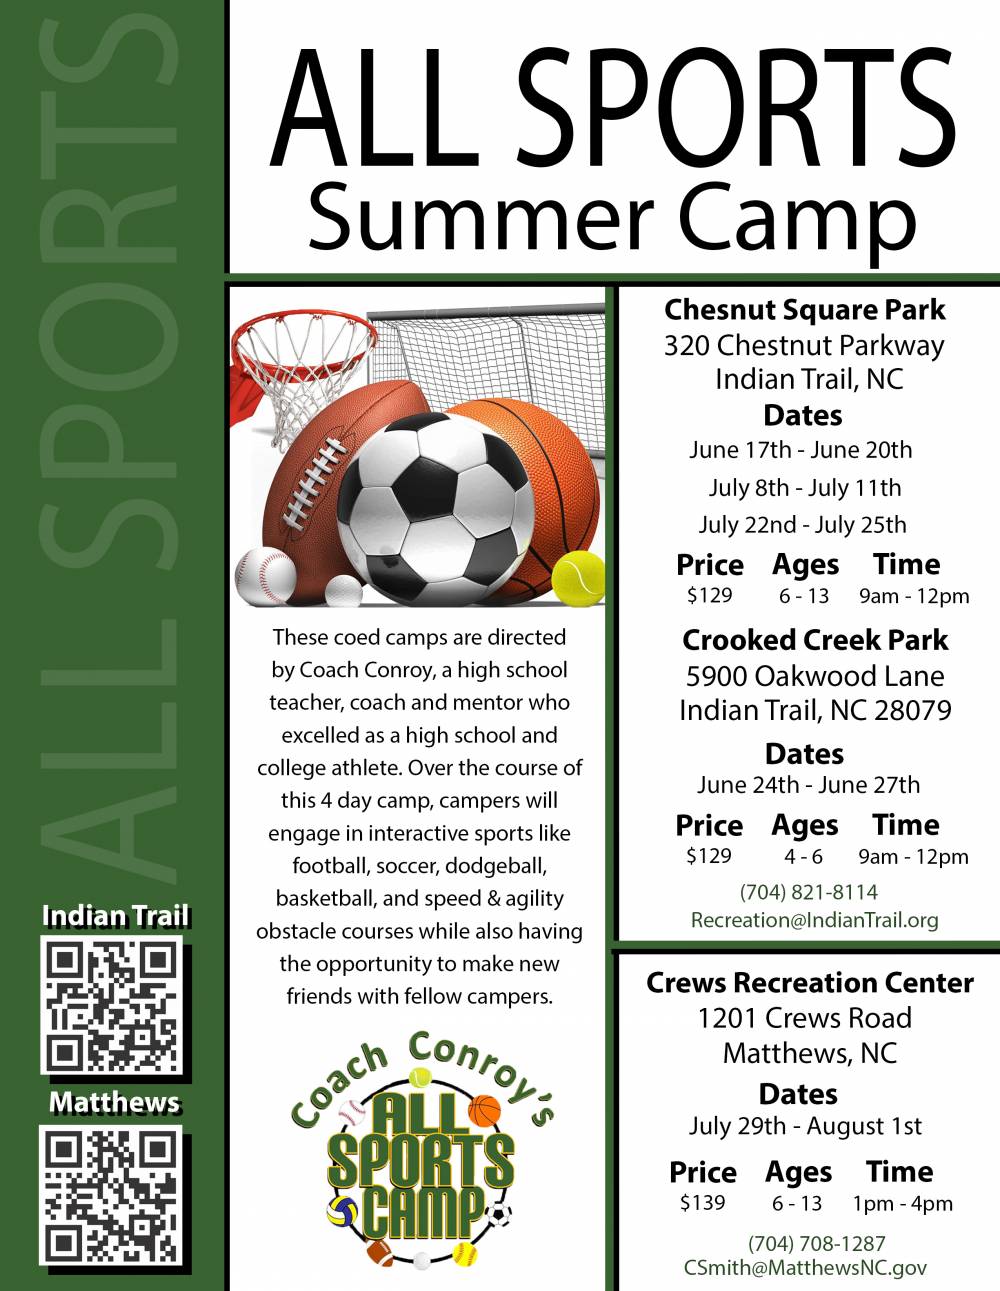 TOP NORTH CAROLINA GIRLS CAMP: Coach Conroy s All Sports Camp is a Top Girls Summer Camp located in Indian Trail North Carolina offering many fun and enriching Girls and other camp programs. 